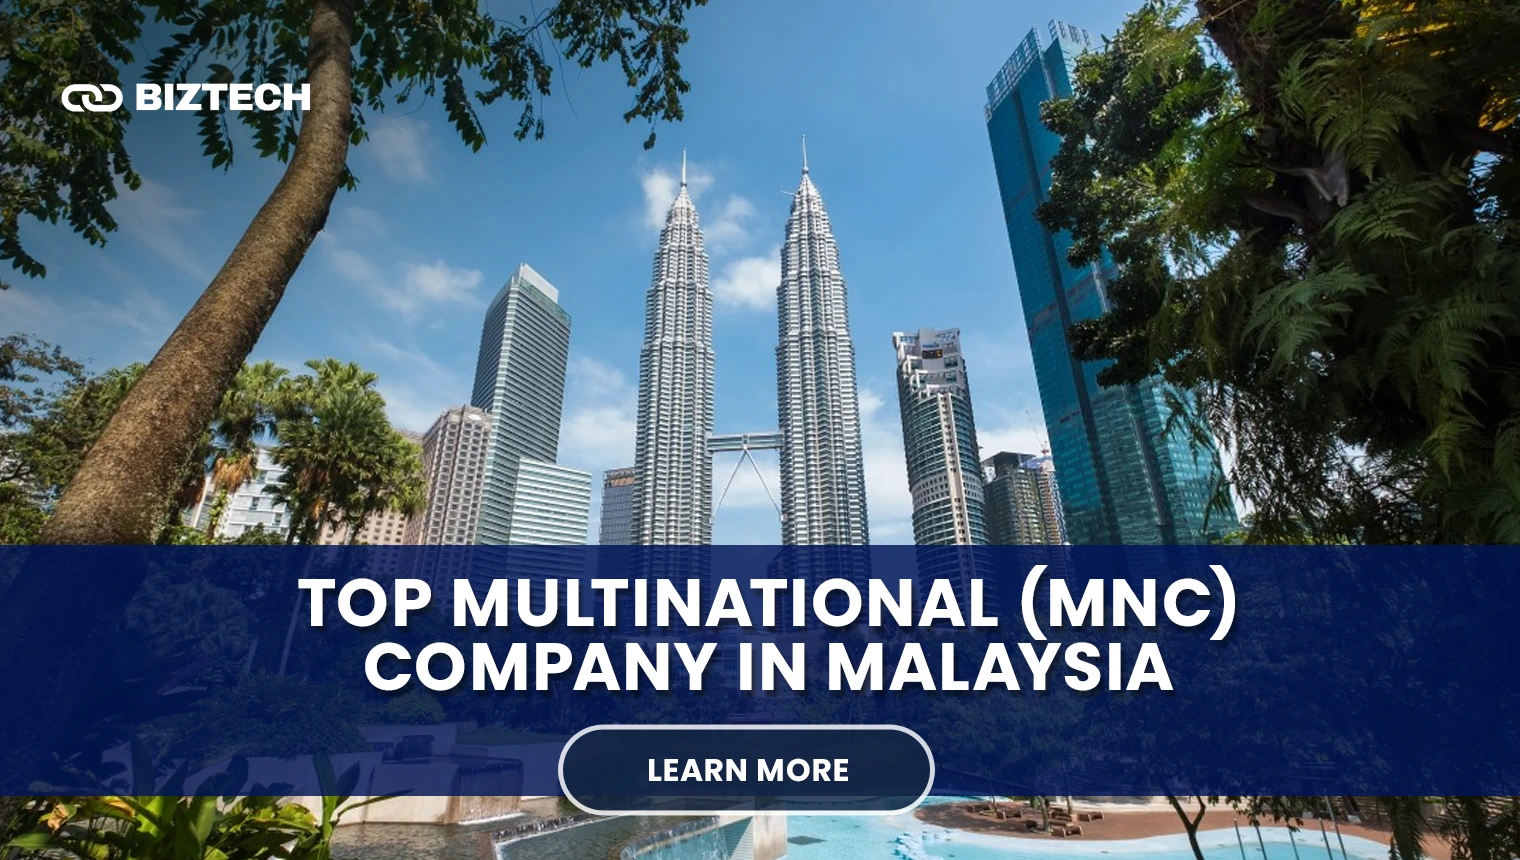 Top Multinational (MNC) Company in Malaysia